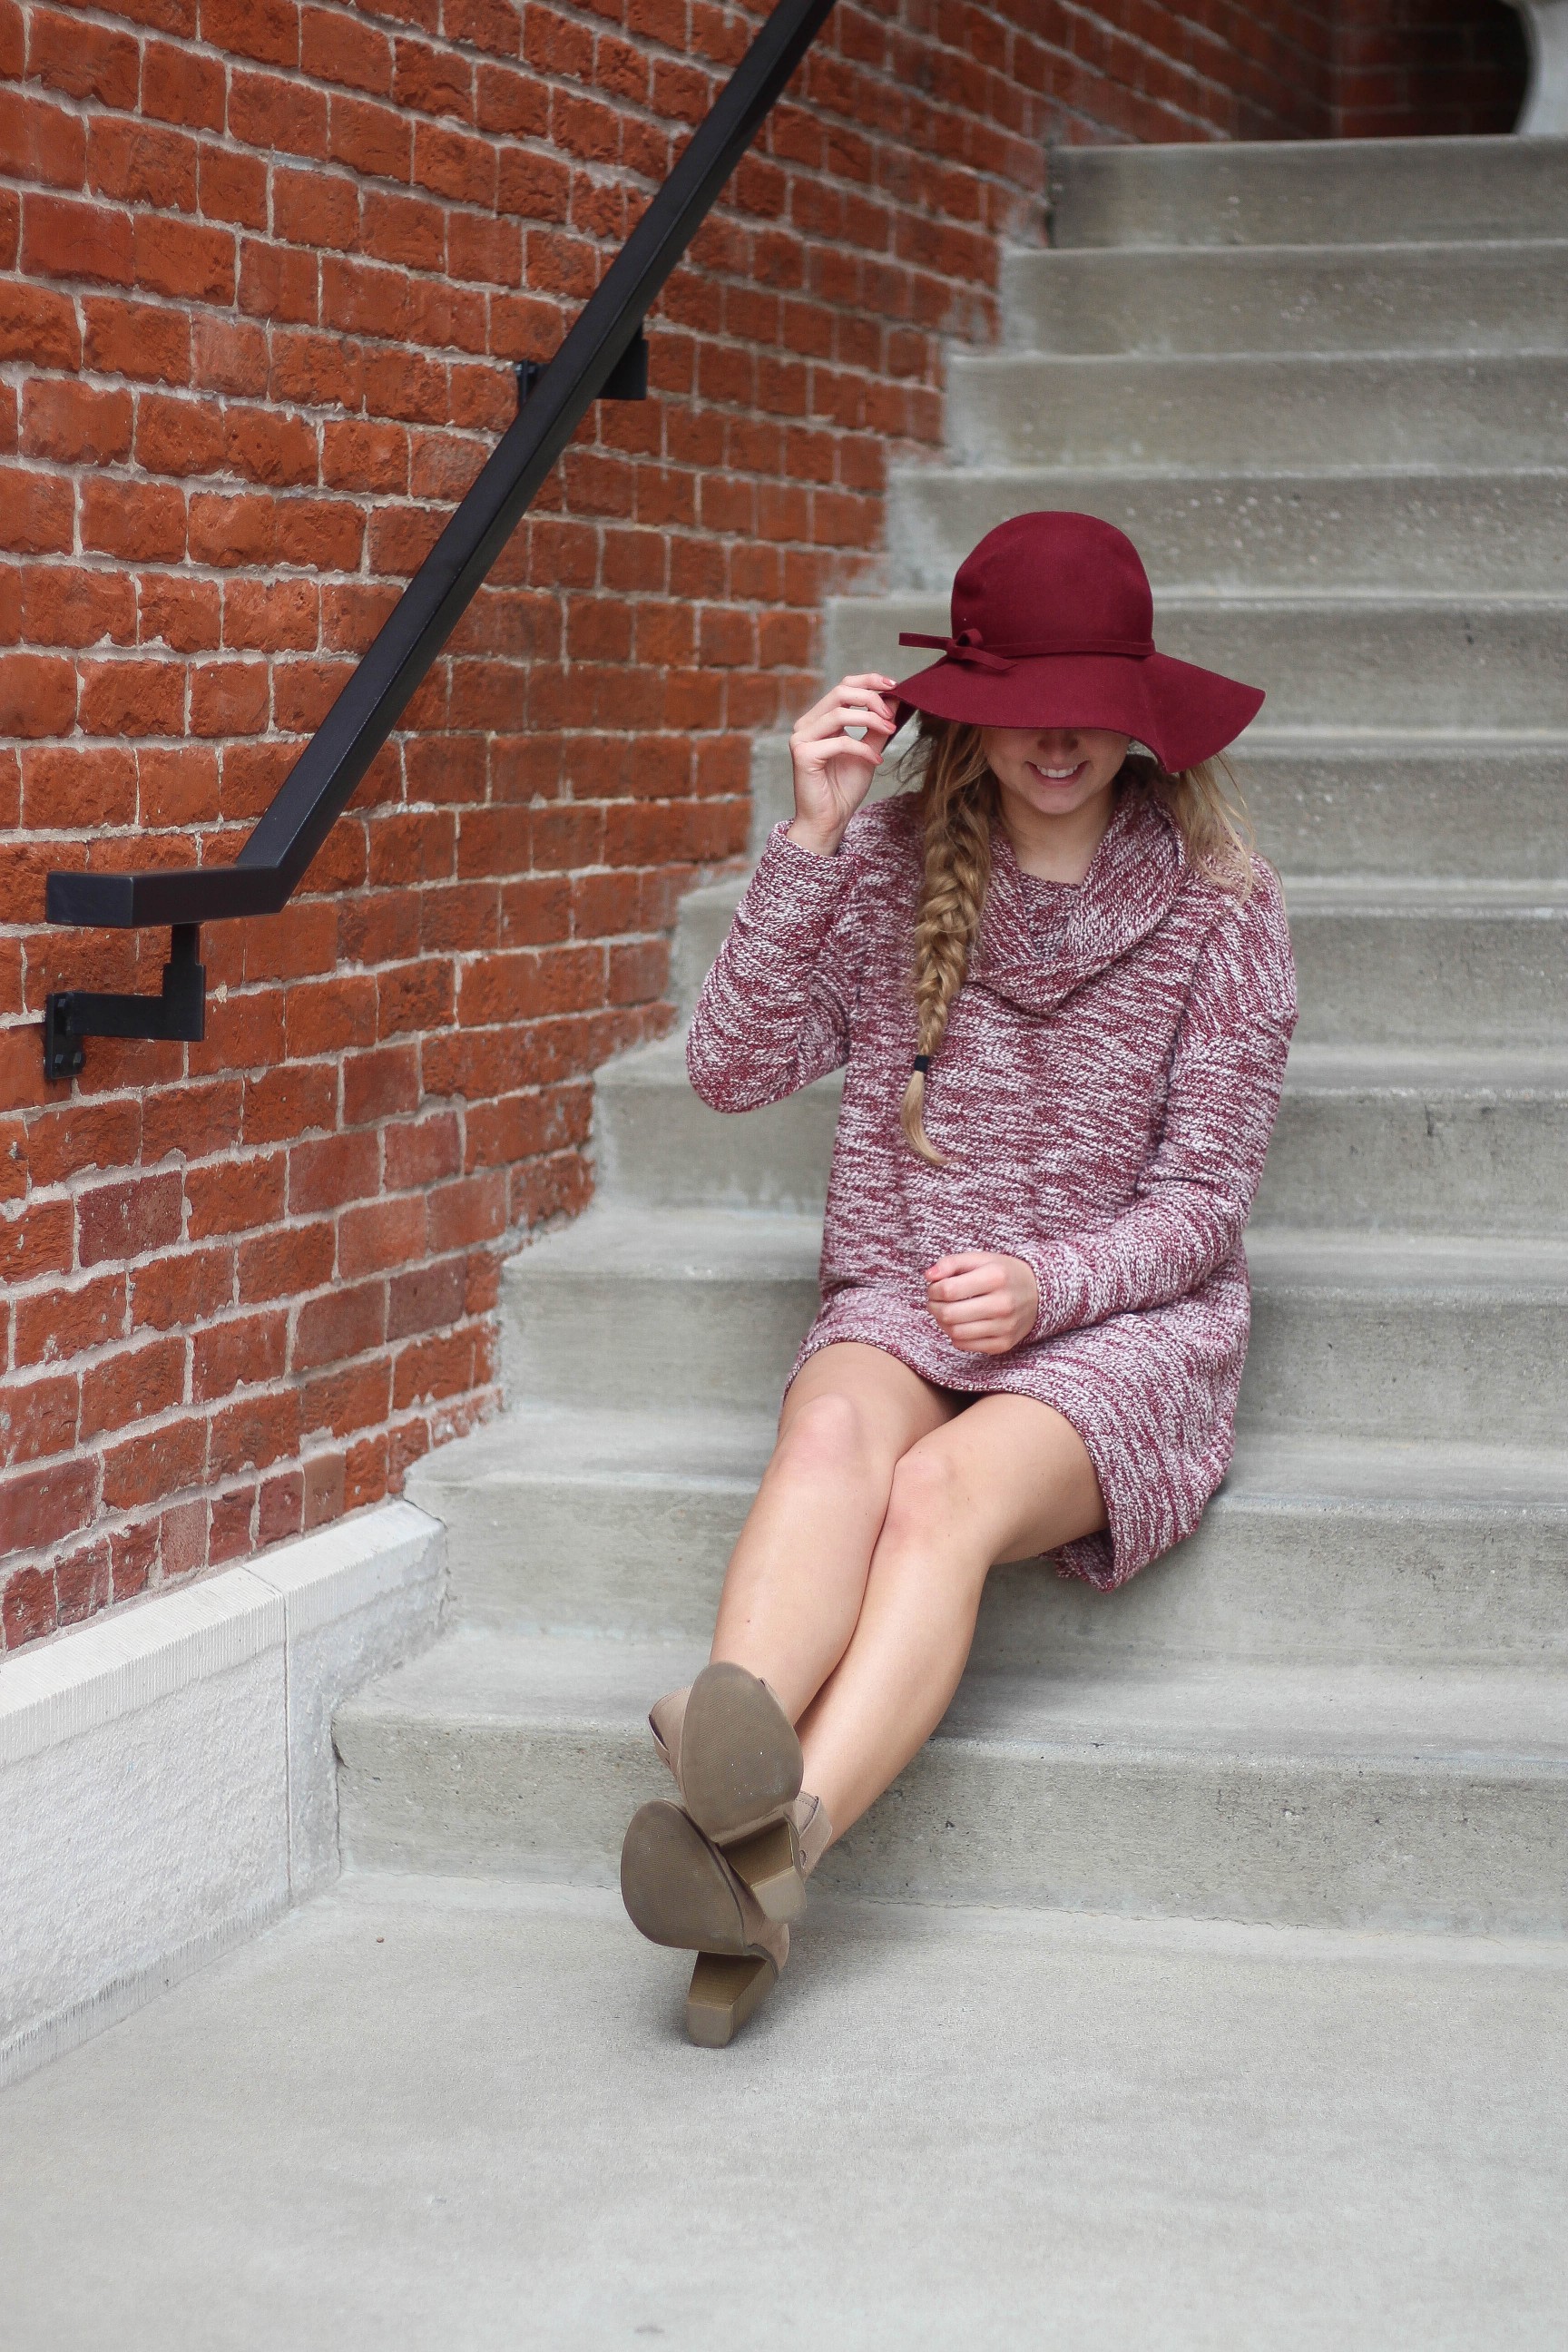 Fall Sweater dress with burgundy her and booties outfit of the day on daily dose of charm by lauren lindmark on dailydoseofcharm.com